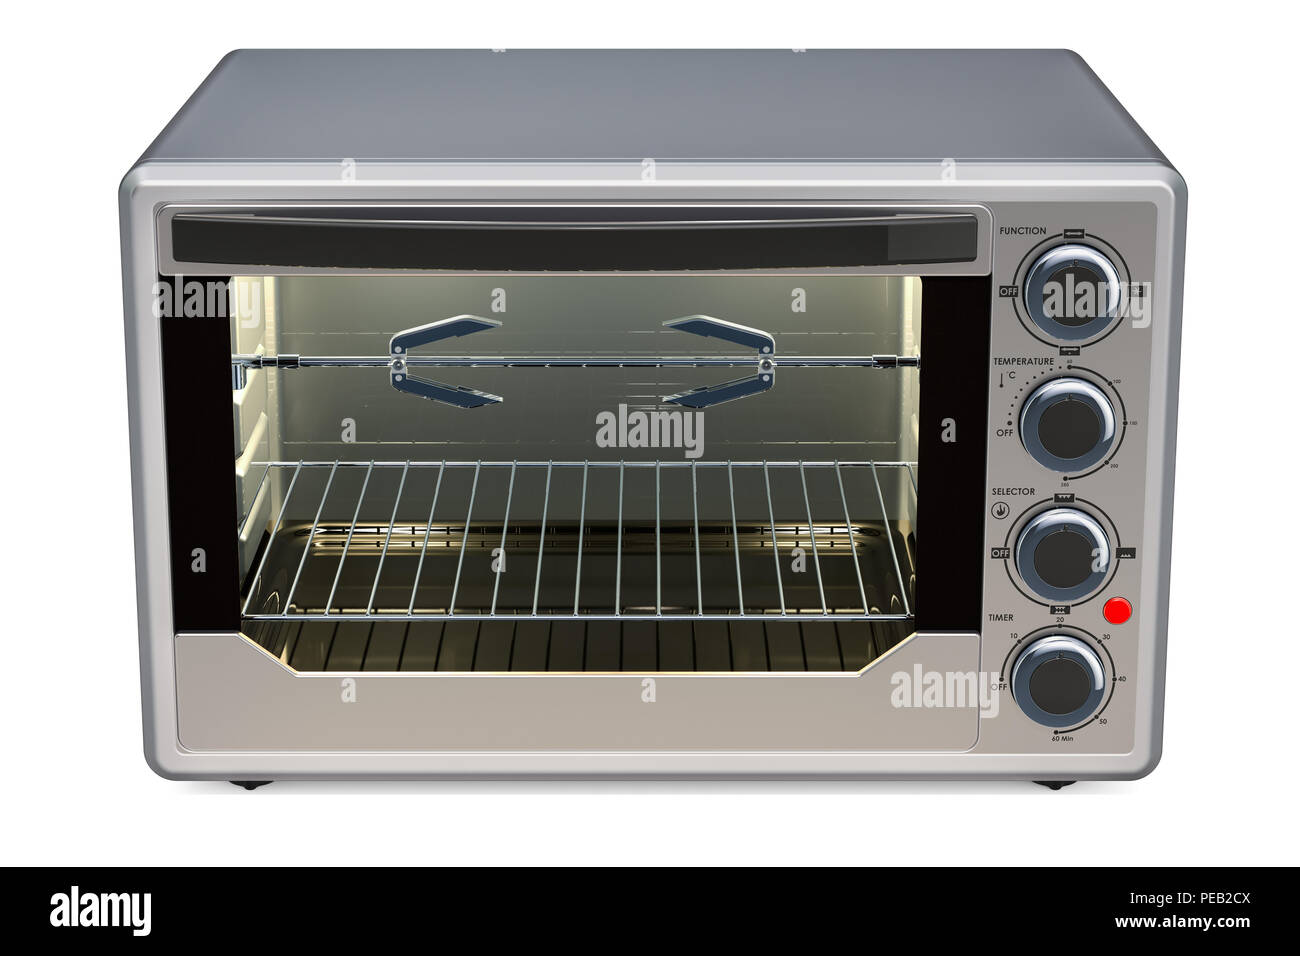 https://c8.alamy.com/comp/PEB2CX/convection-toaster-oven-with-rotisserie-and-grill-3d-rendering-isolated-on-white-background-PEB2CX.jpg